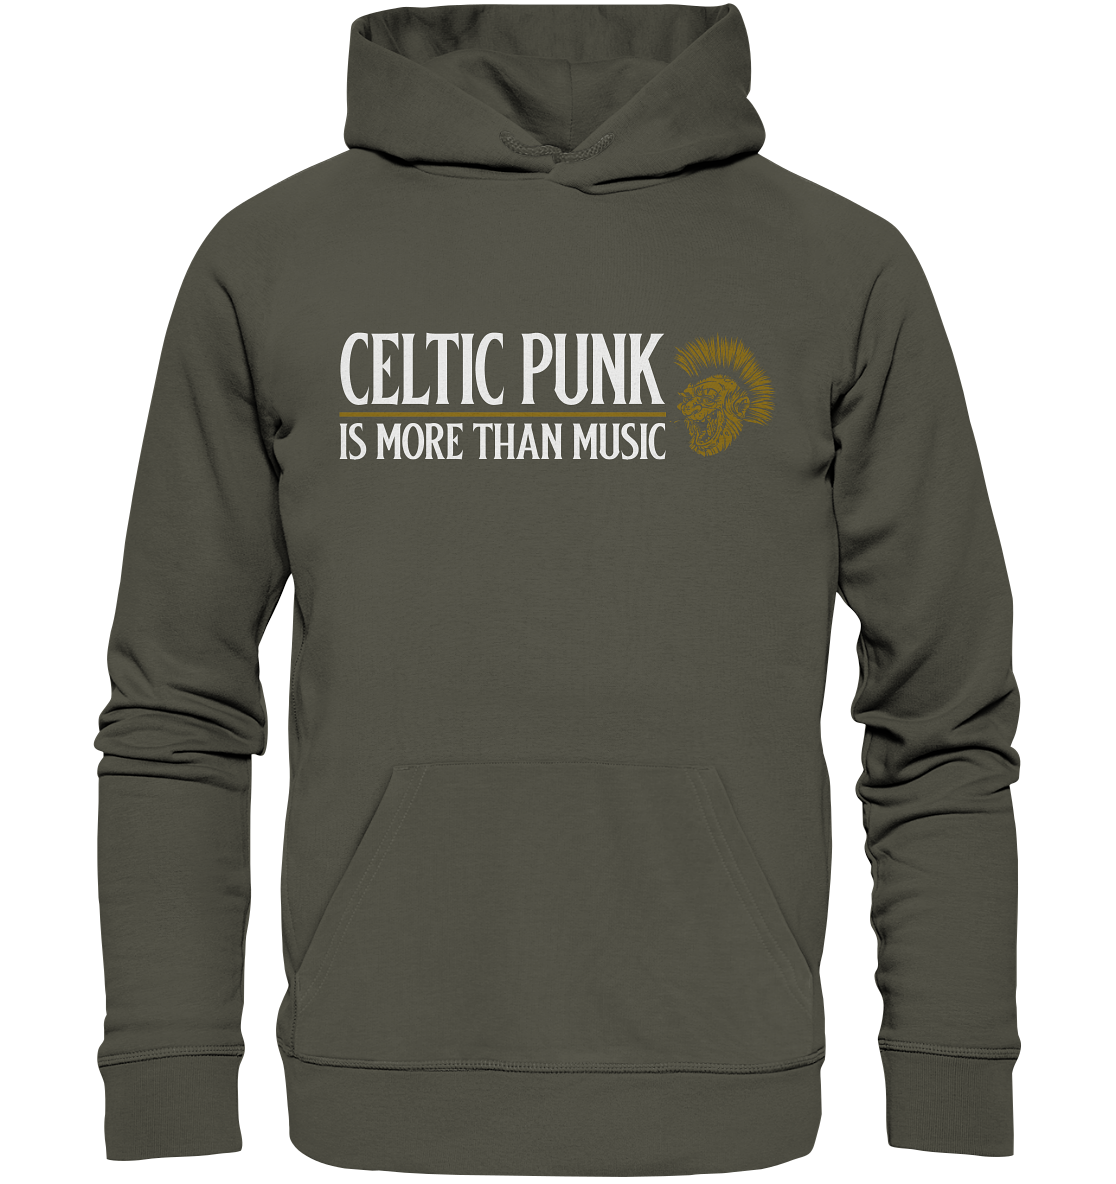 Celtic Punk "Is More Than Music" - Organic Hoodie